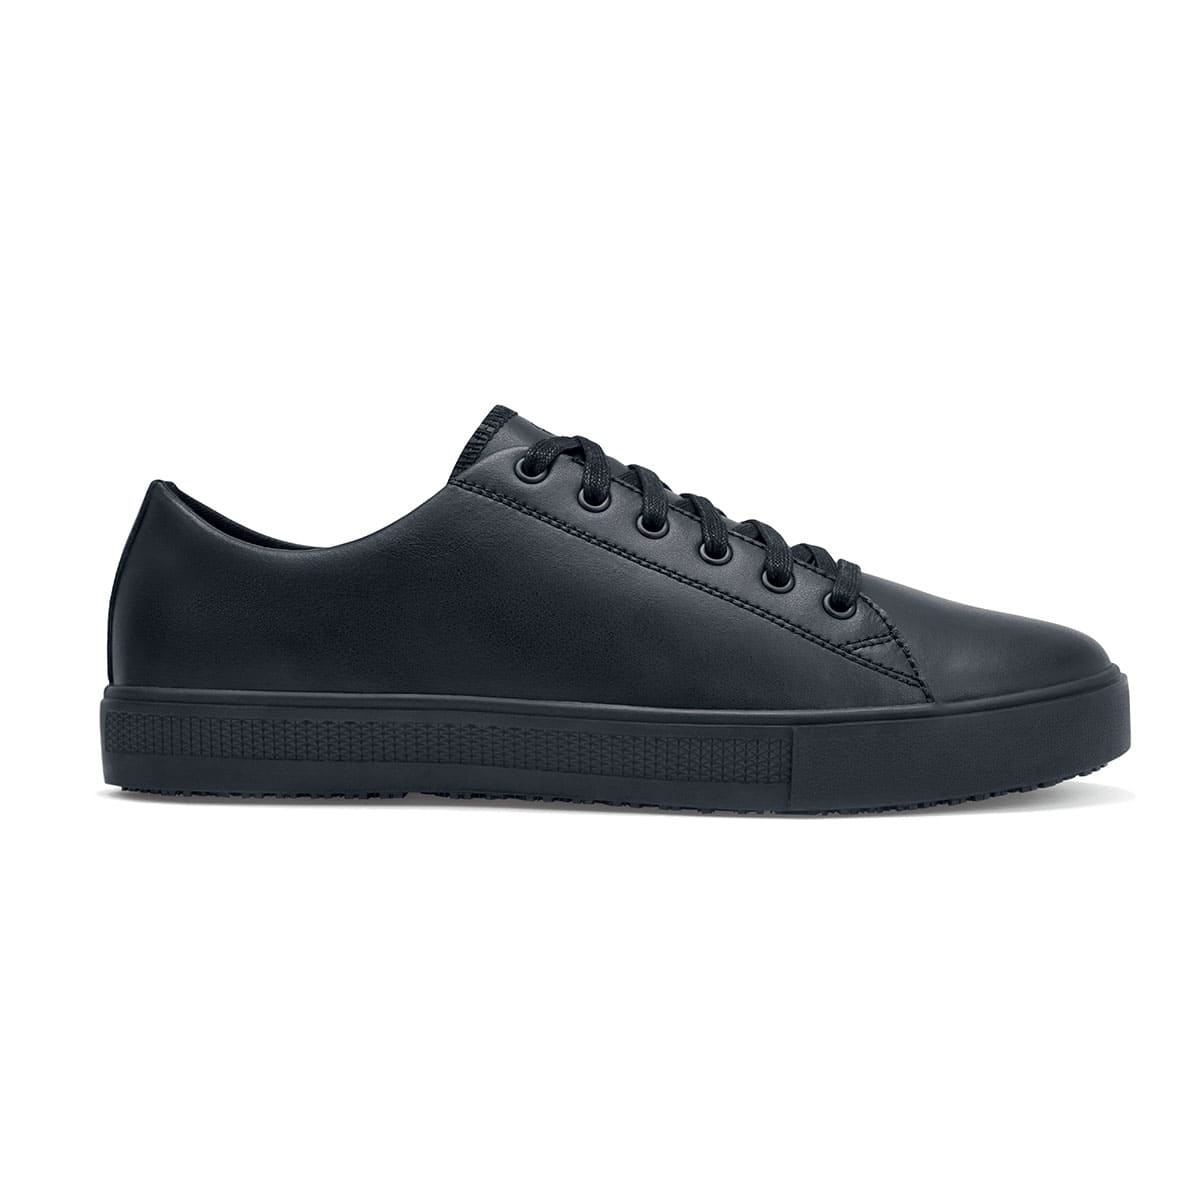 The Old School Low-Rider Black Gladiator Outsole from Shoes For Crews is a slip resistant lace-up shoe designed to provide comfort throughout the day, seen from the right.